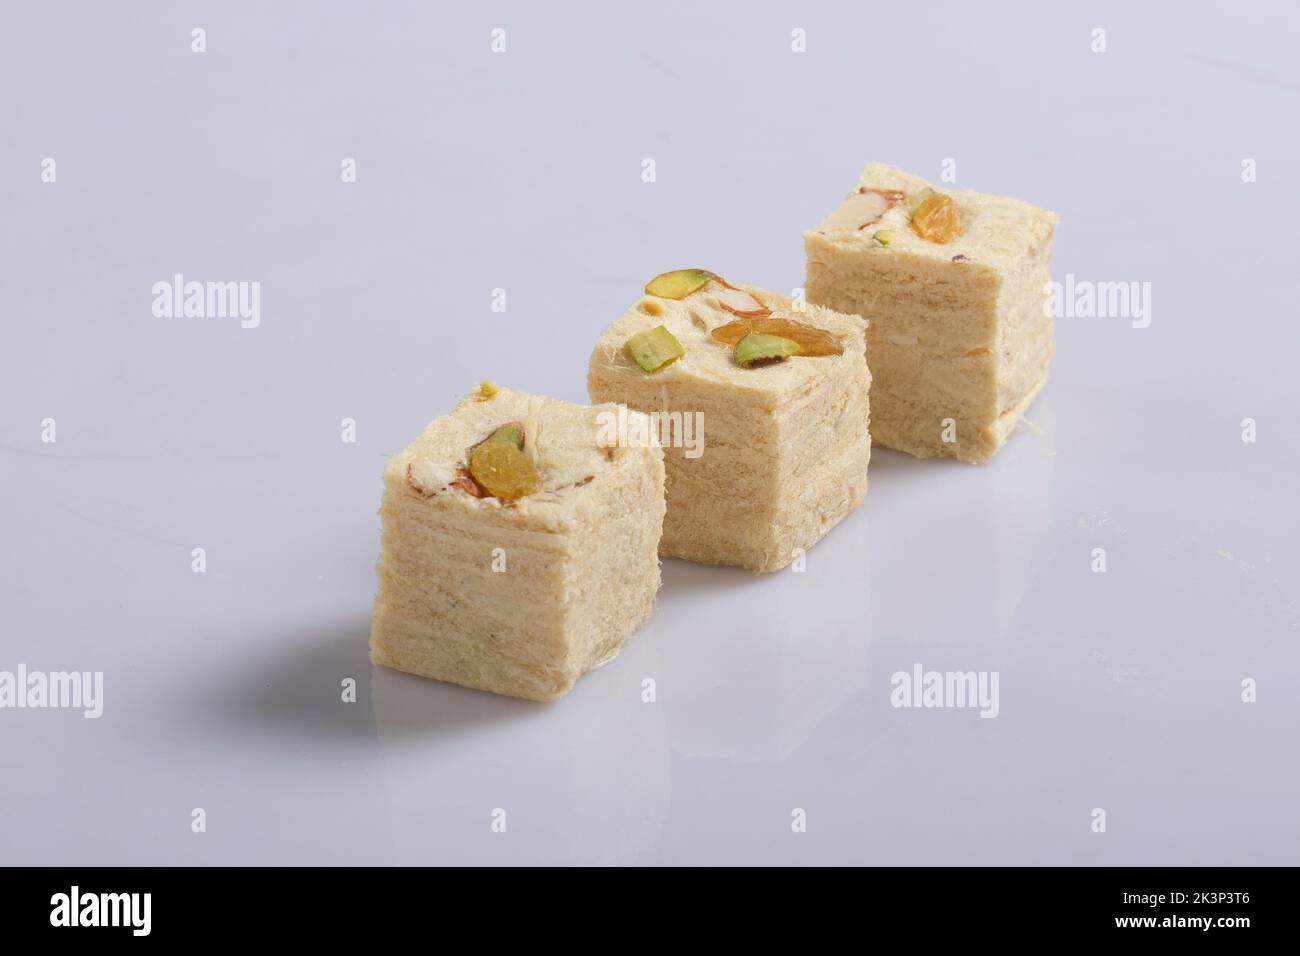 Soan Papdi is a popular Indian cube shape flakey crispy dessert. Served with almonds and pistachio in a plate over moody background. Stock Photo